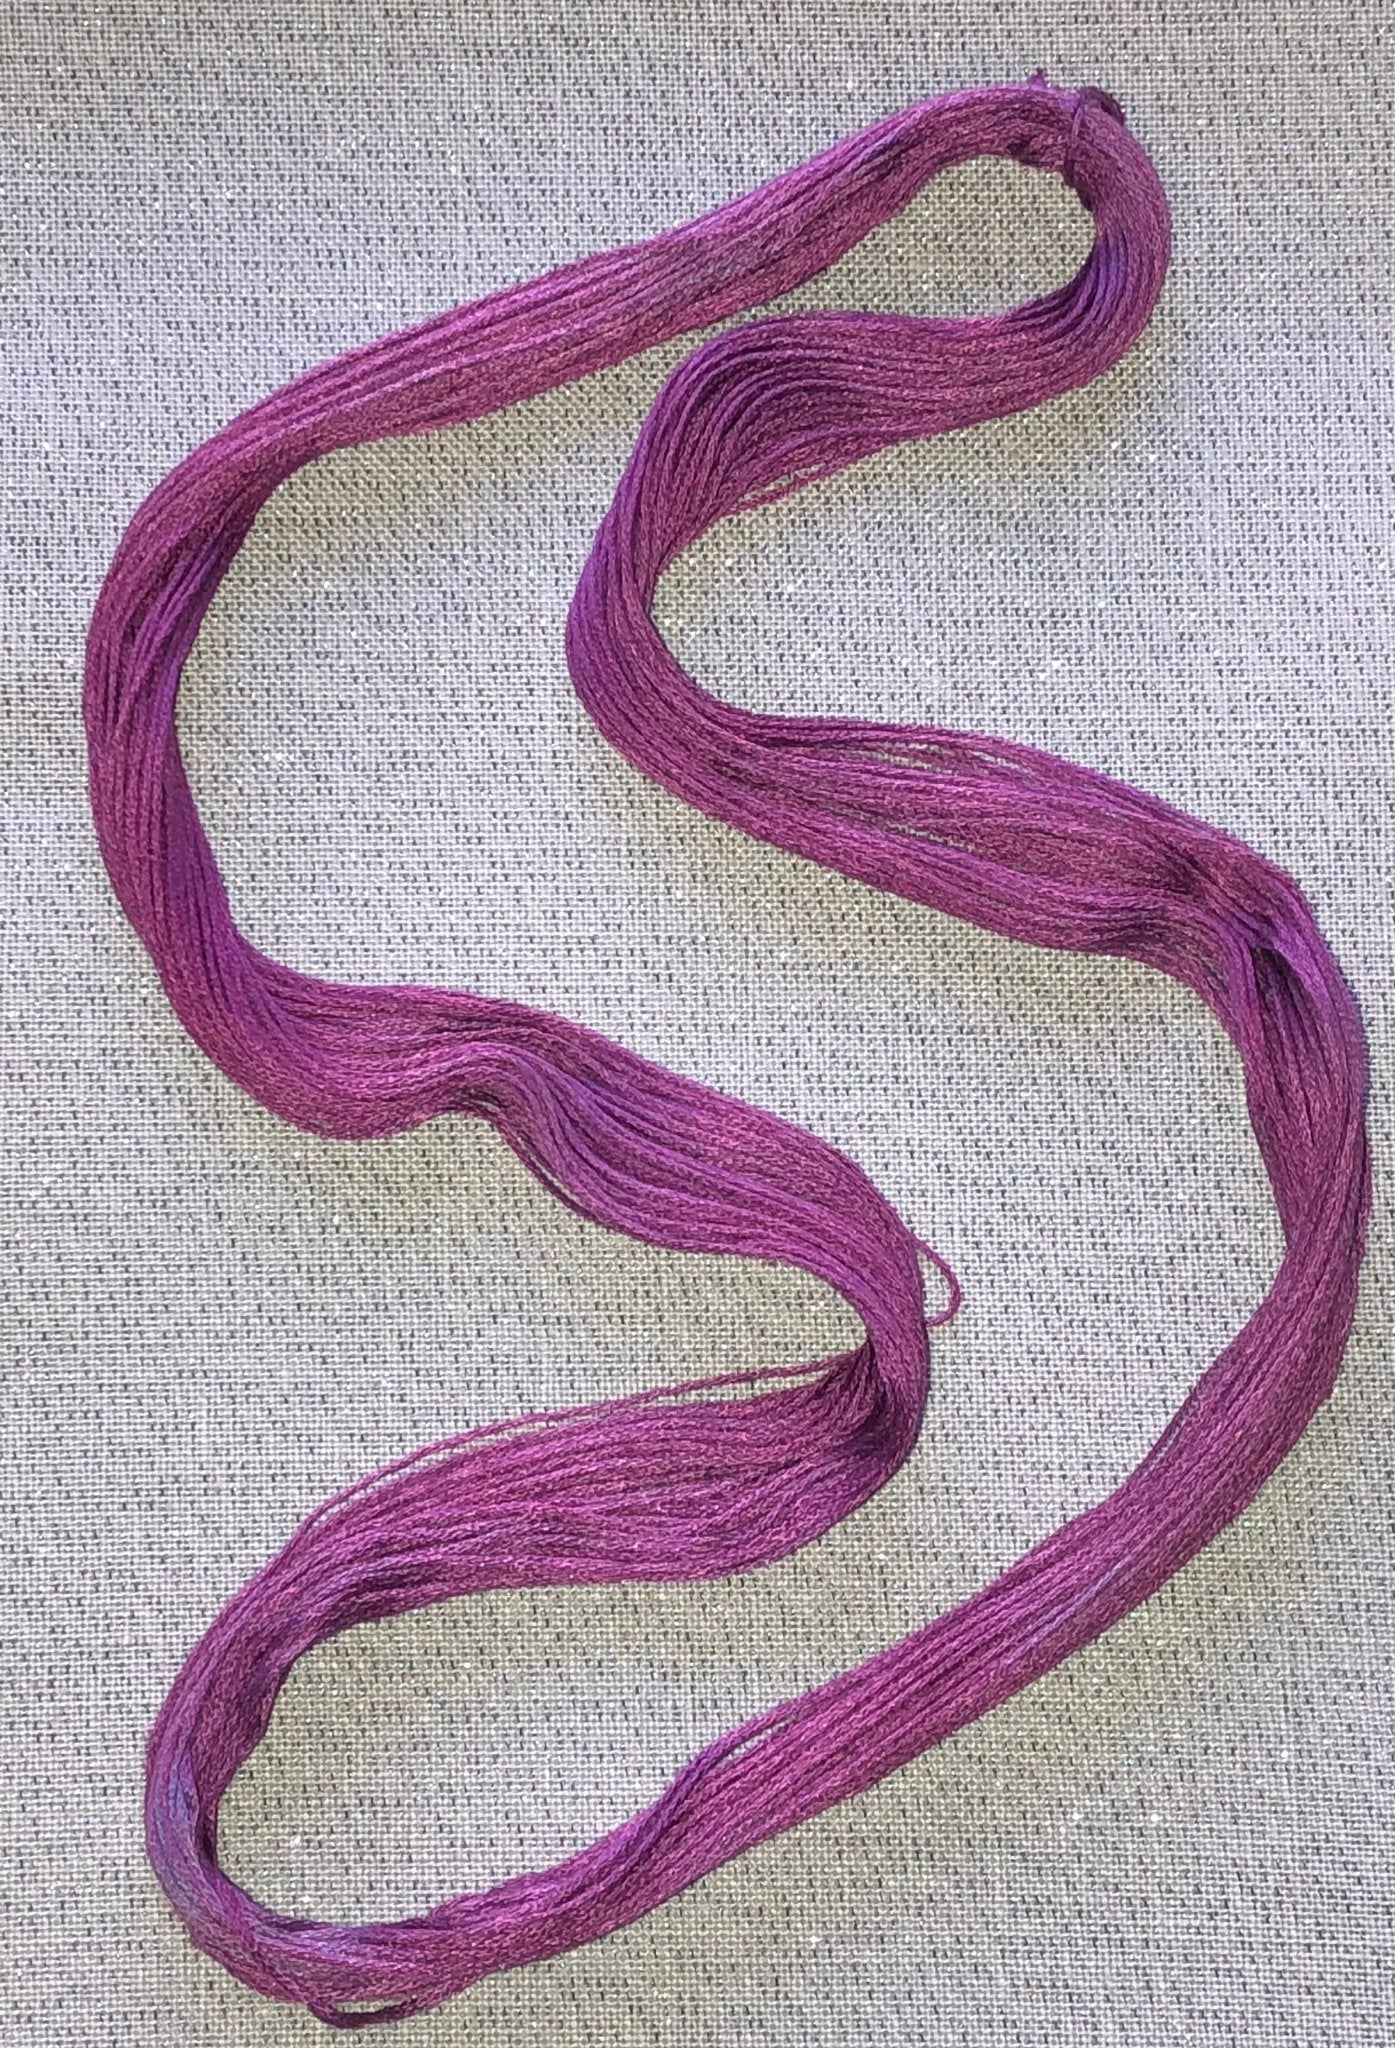 Silk hand dyed floss - Concord - Dyeing for Cross Stitch